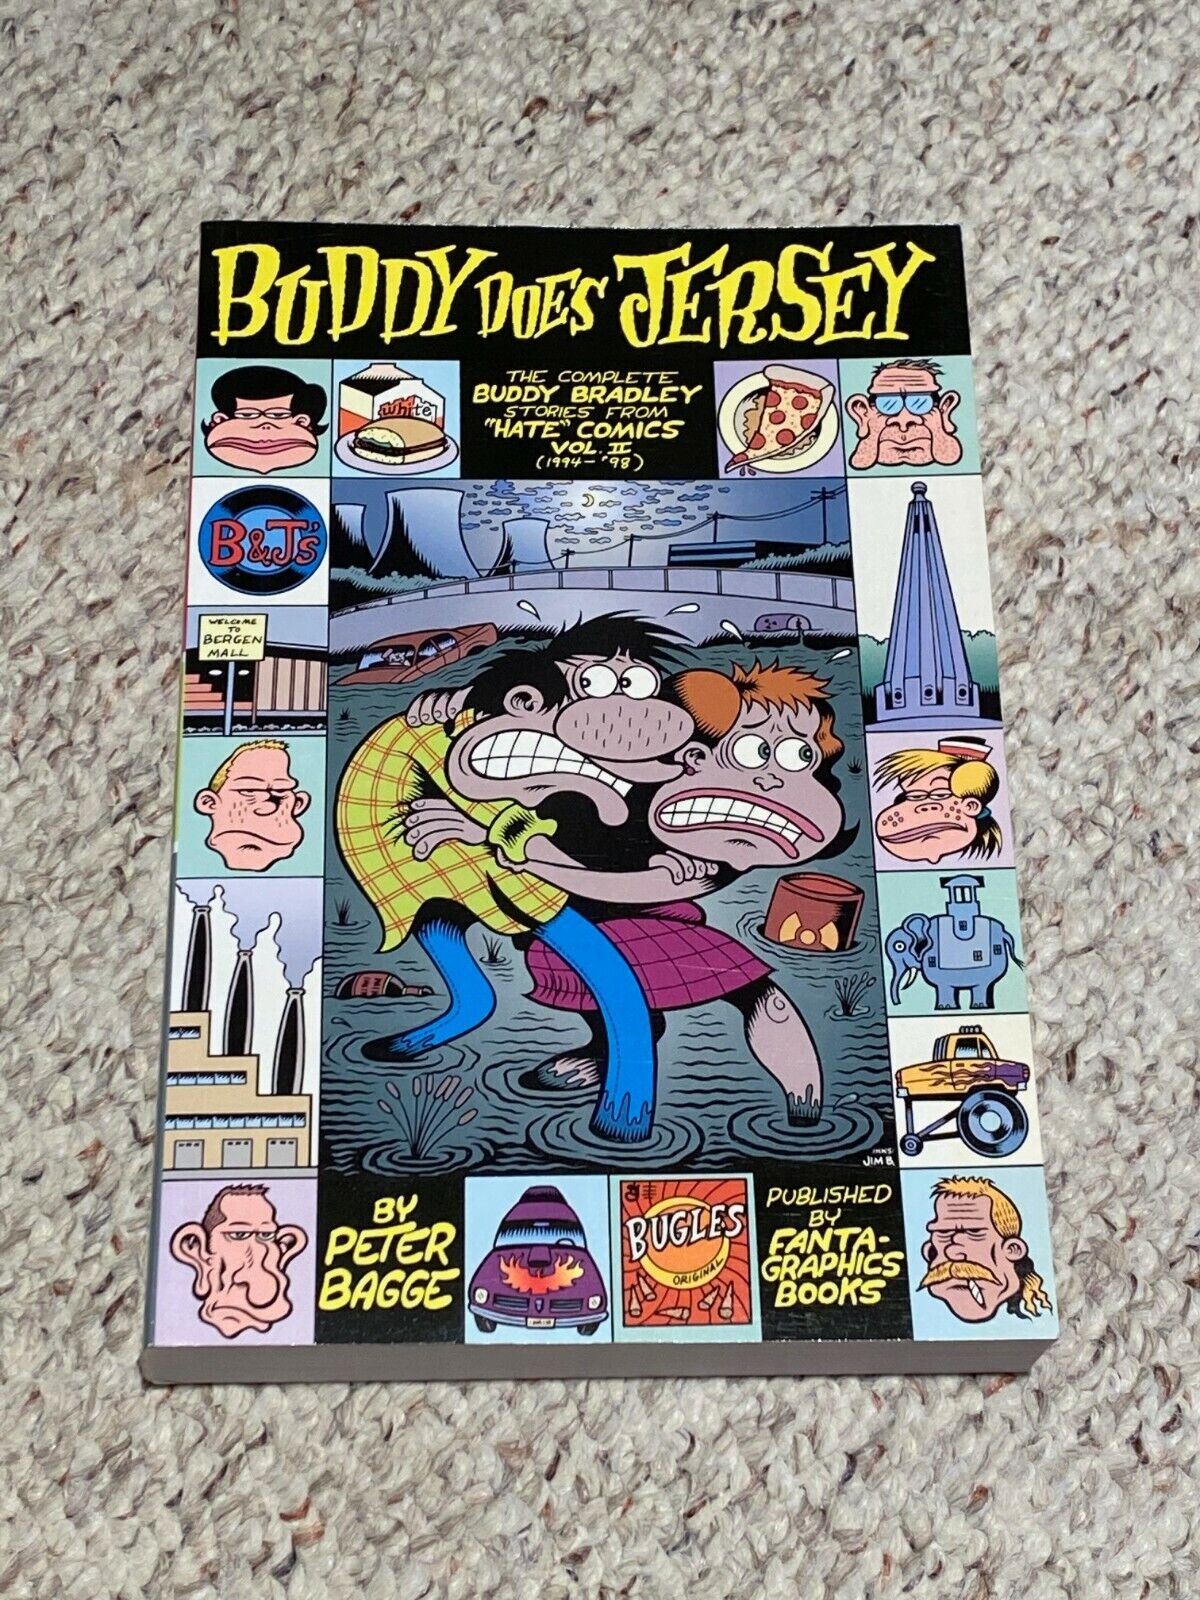 PETER BAGGE Signed BUDDY DOES JERSEY HUGE SOFTCOVER